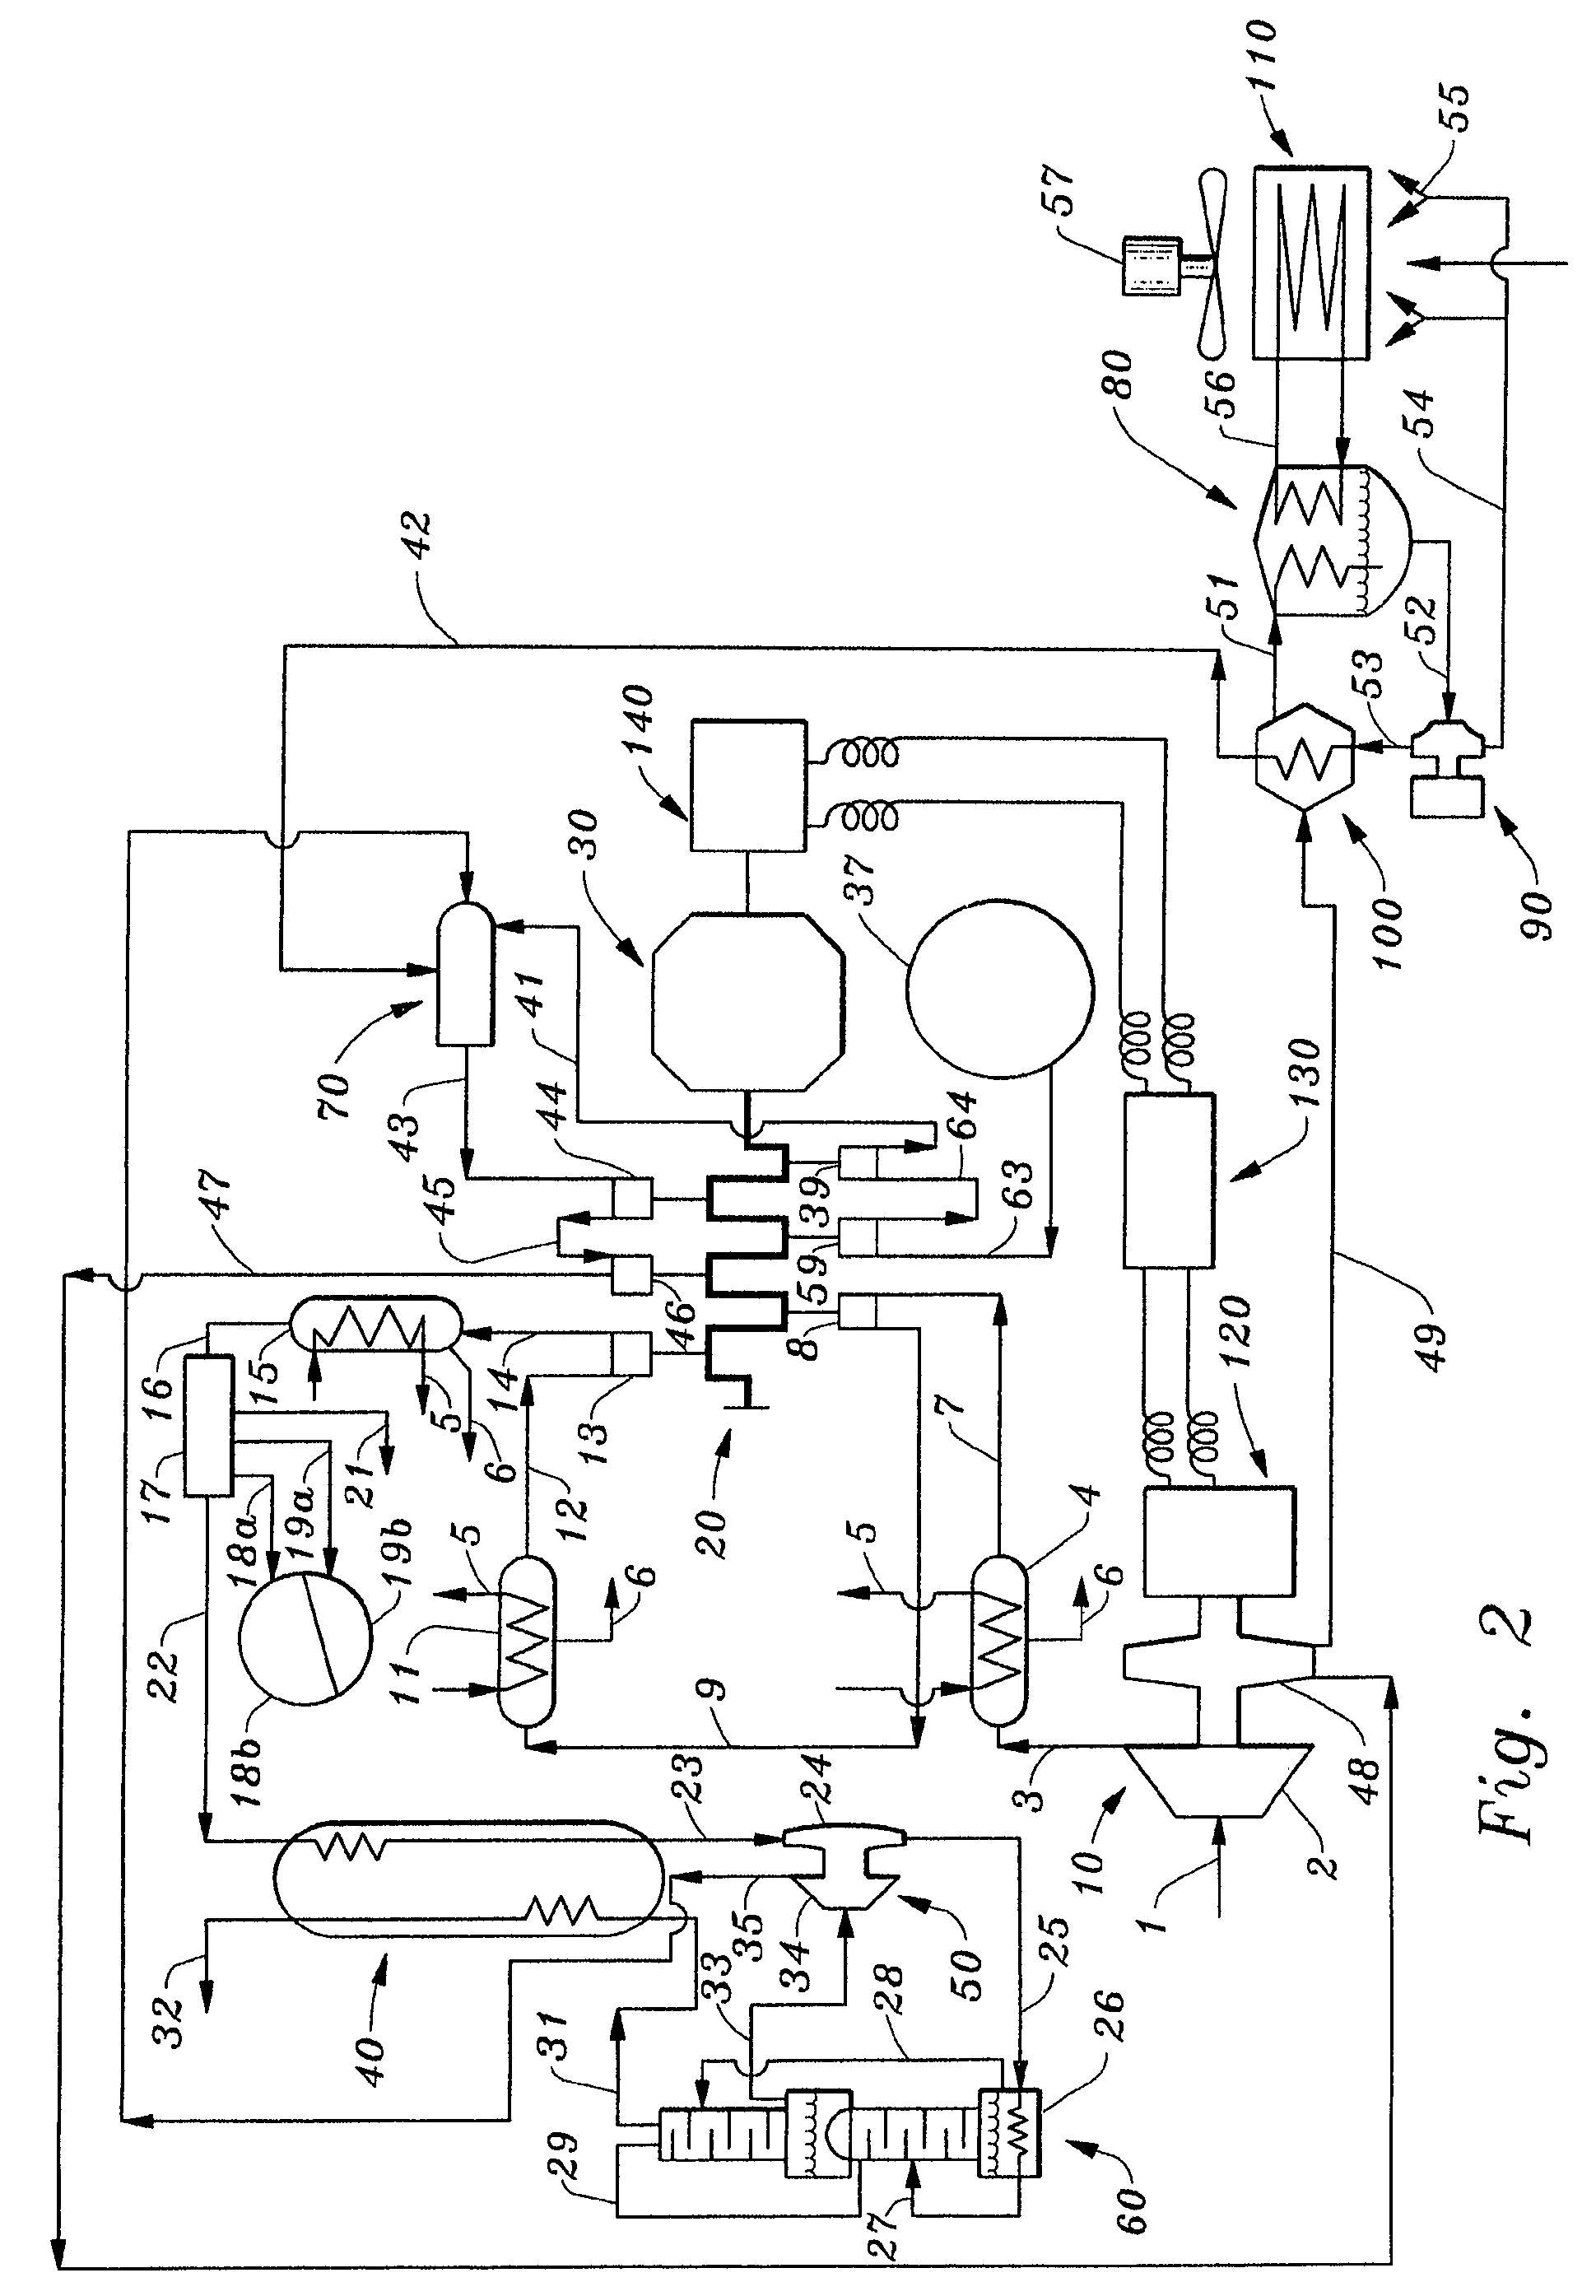 Hydrocarbon combustion power generation system with CO2 sequestration